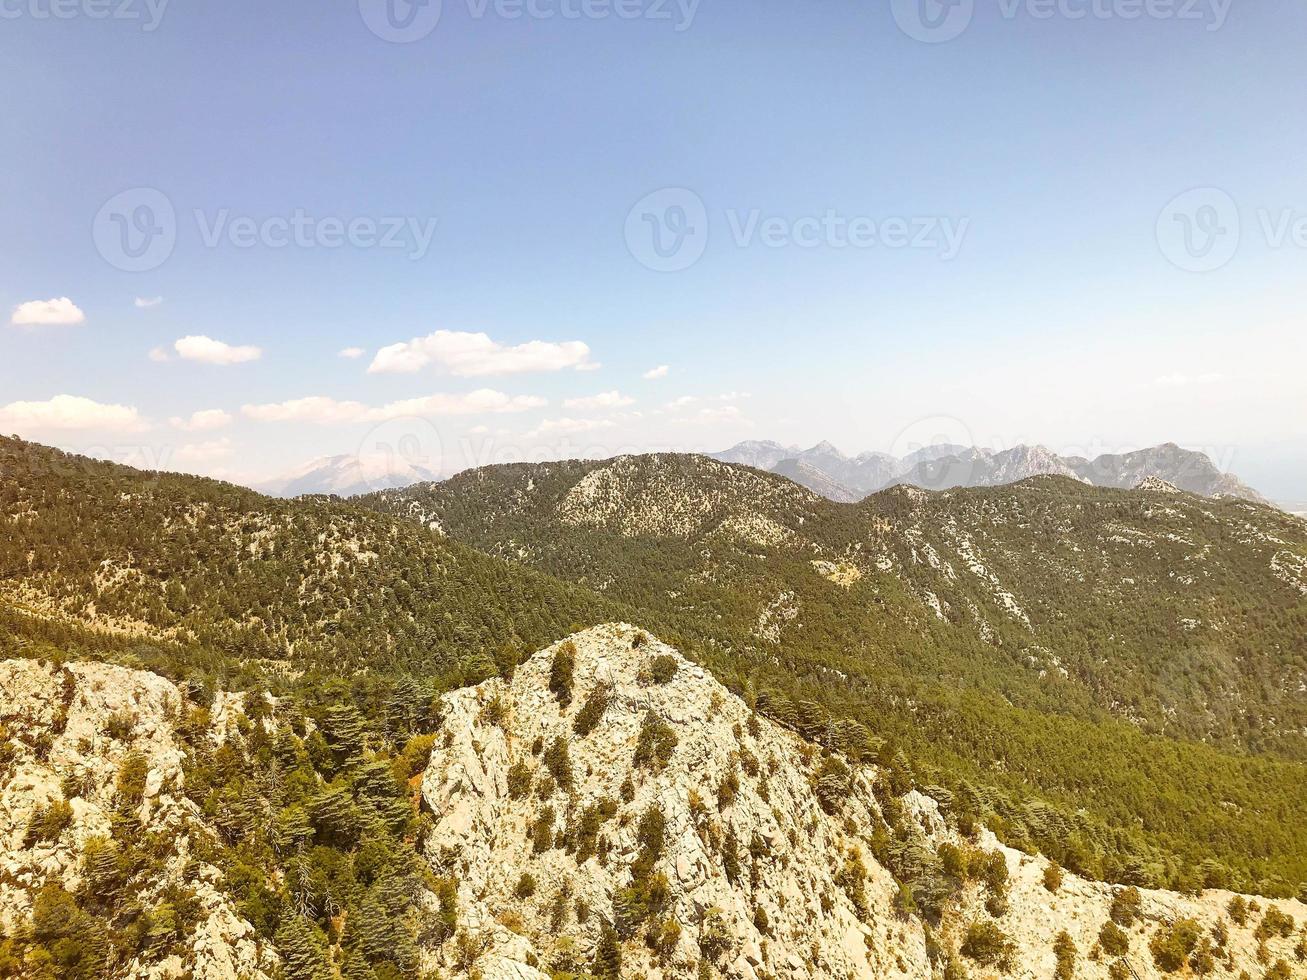 mountains in a hot, tropical country against a blue sky. green plants, trees and bushes grow on the mountains. bird's eye view photo